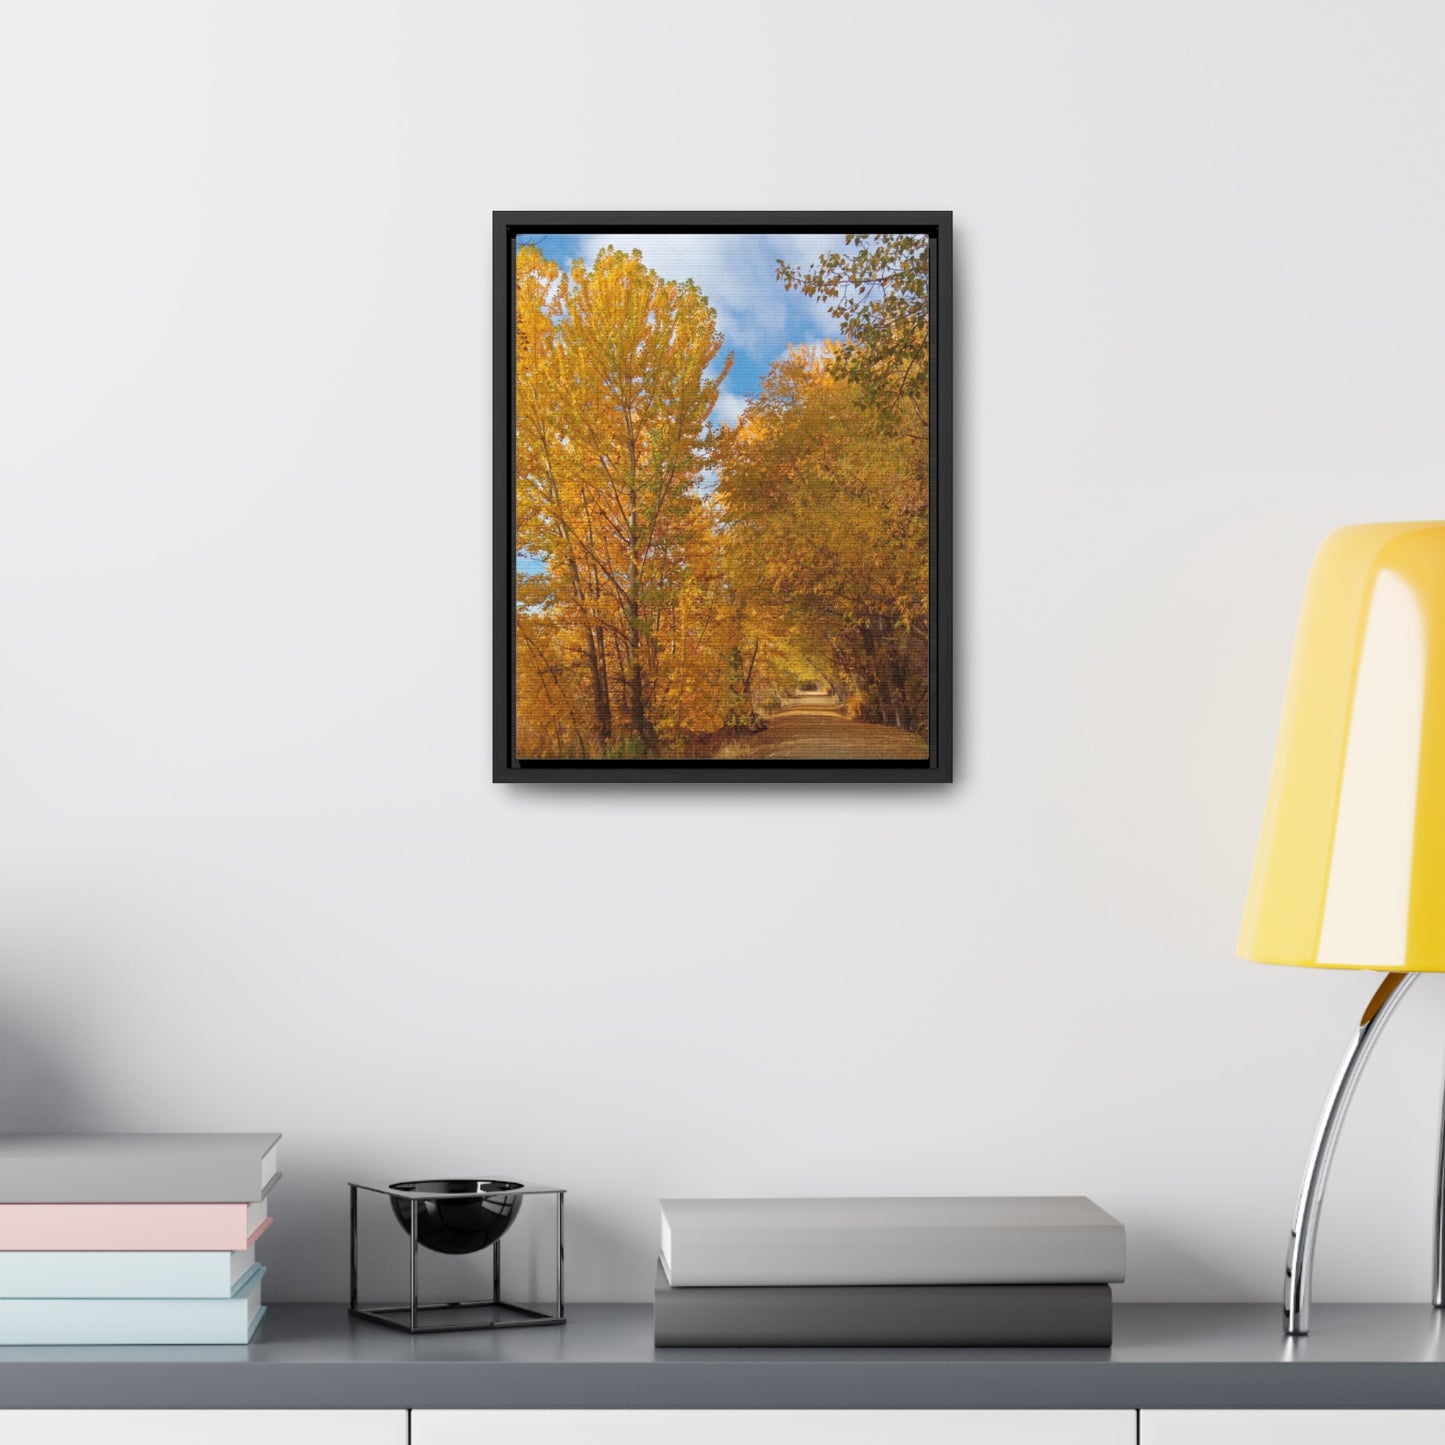 Autumn Trail Gallery Canvas Wraps Framed